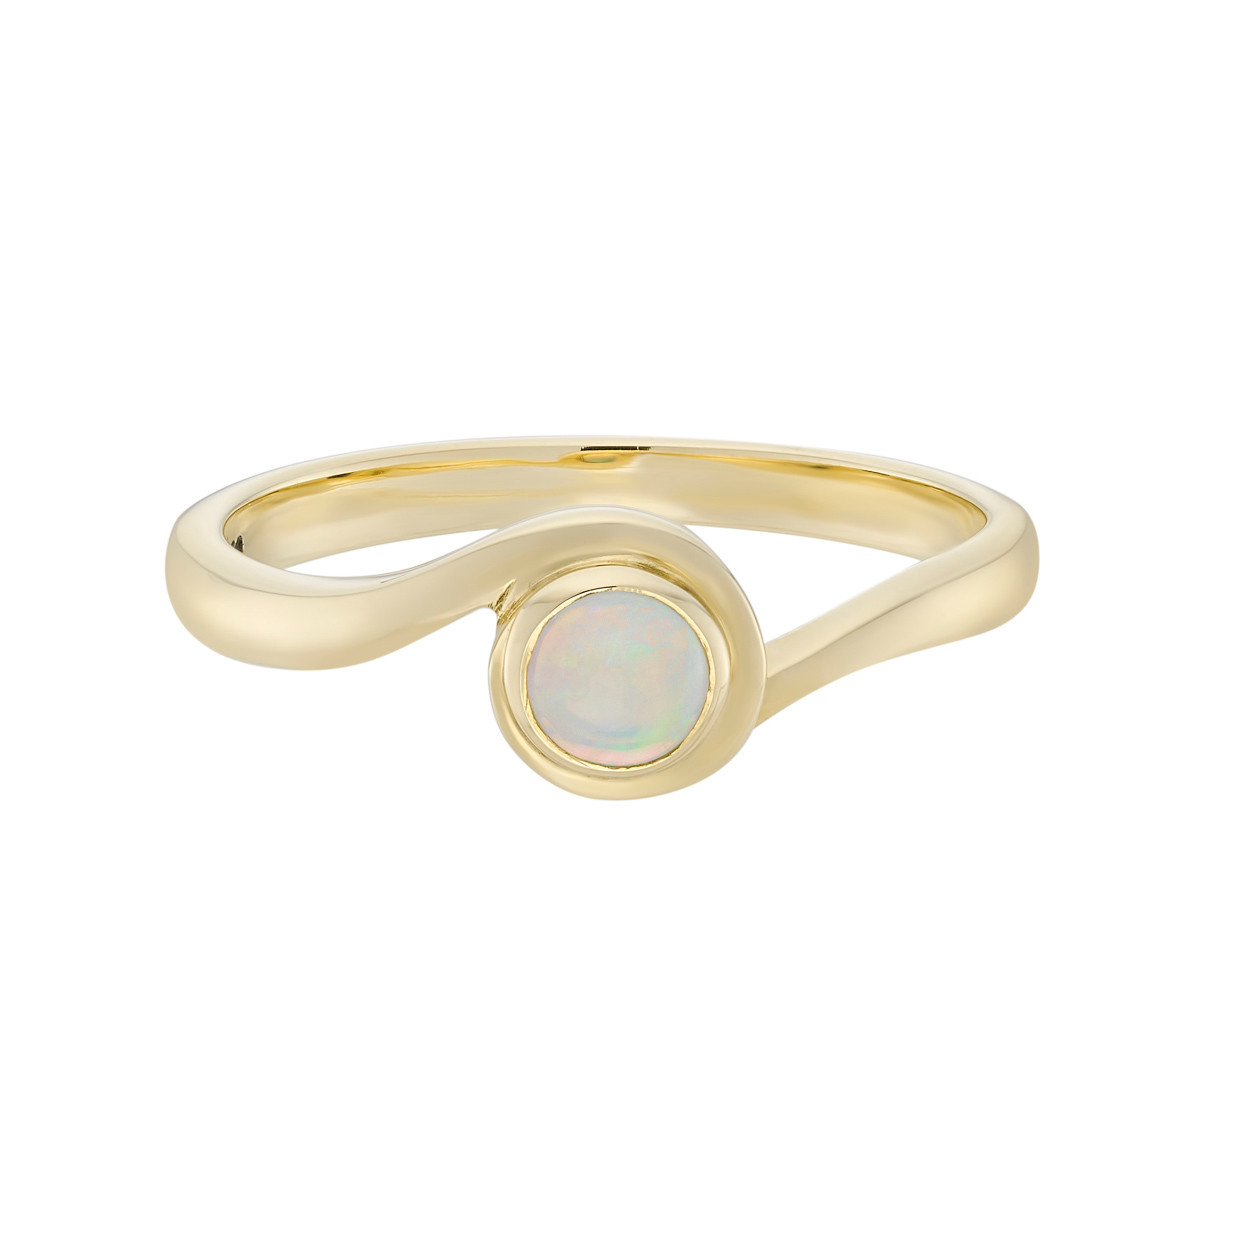 Round Opal Ring, OPAL, tomfoolery